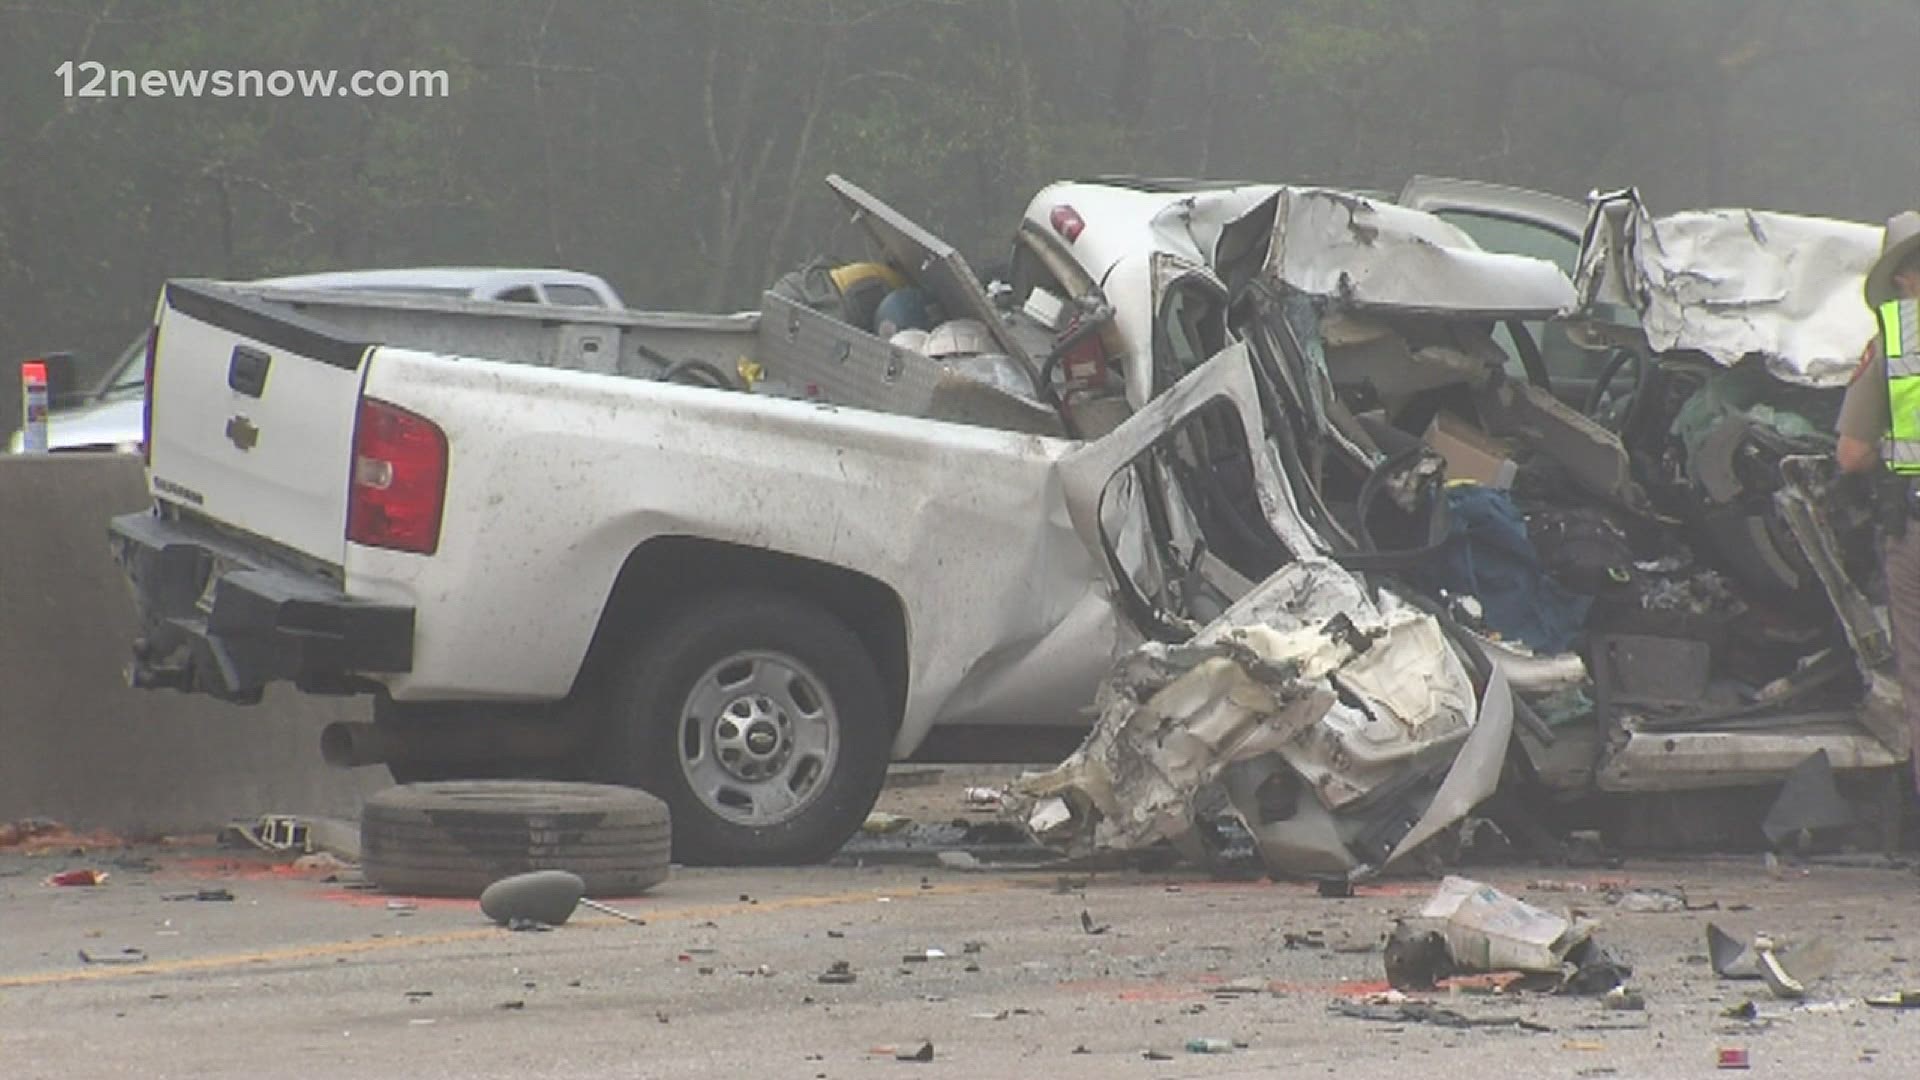 A 21-year-old from Louisiana was killed in the crash